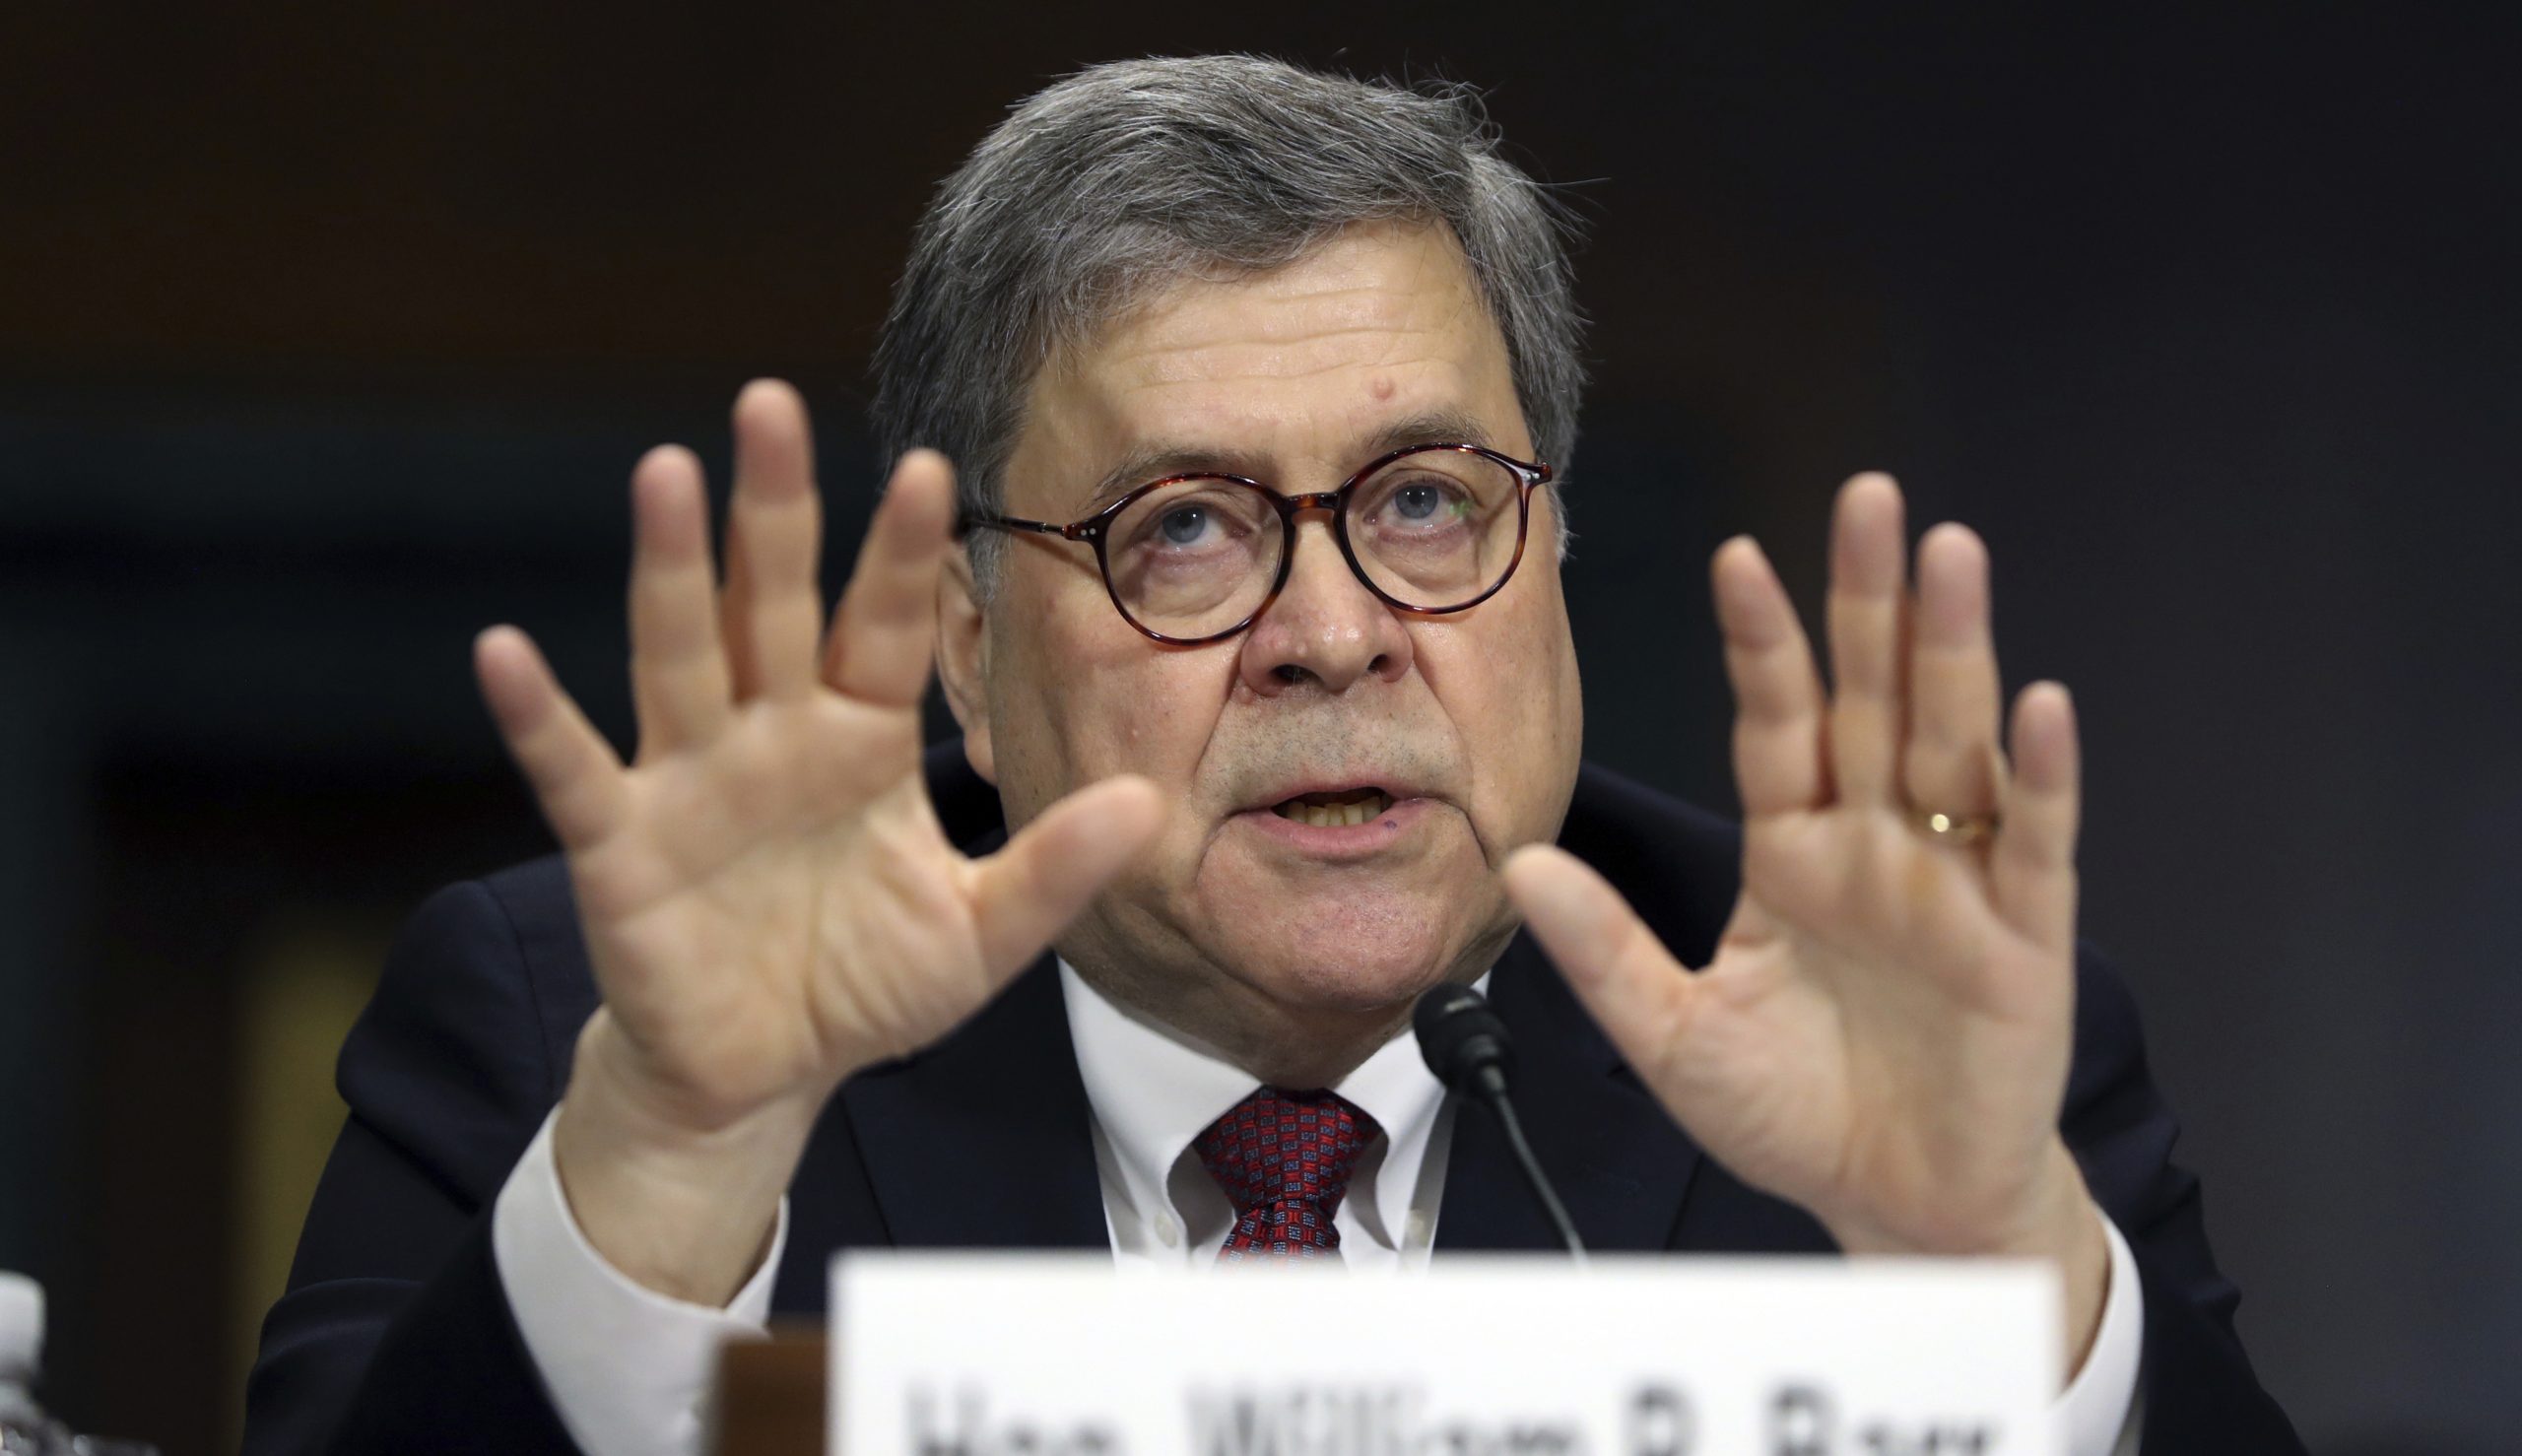 Democrats beware: Barr tears into ‘bogus Russiagate scandal’ in prepared remarks for House hearing - Washington Examiner